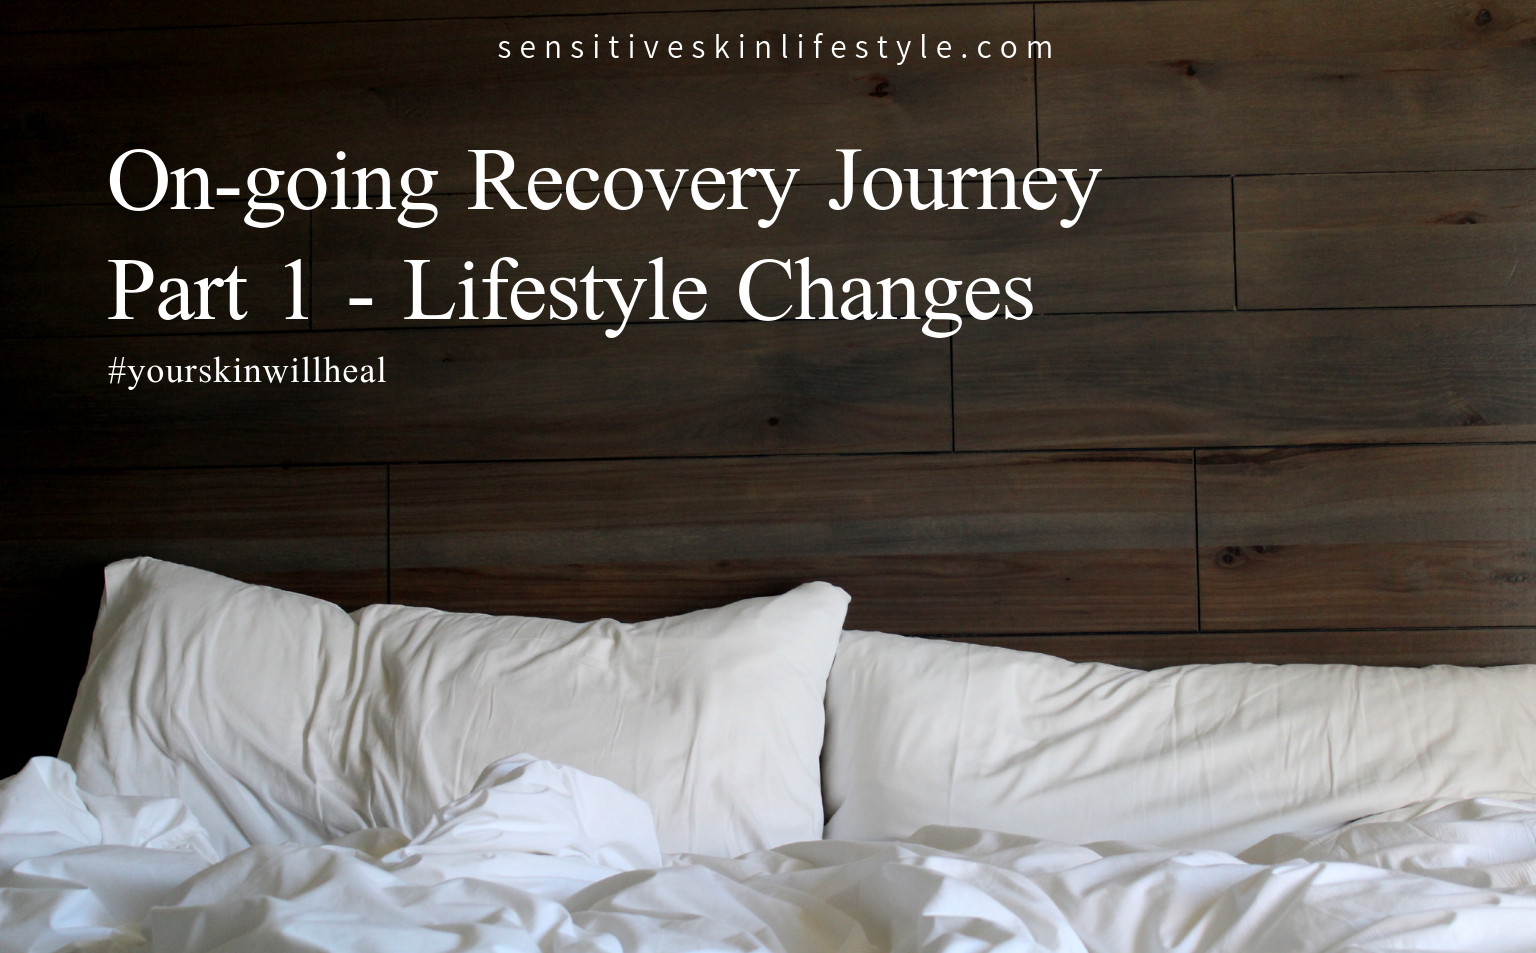 On-going Recovery Journey Part I - Lifestyle Changes